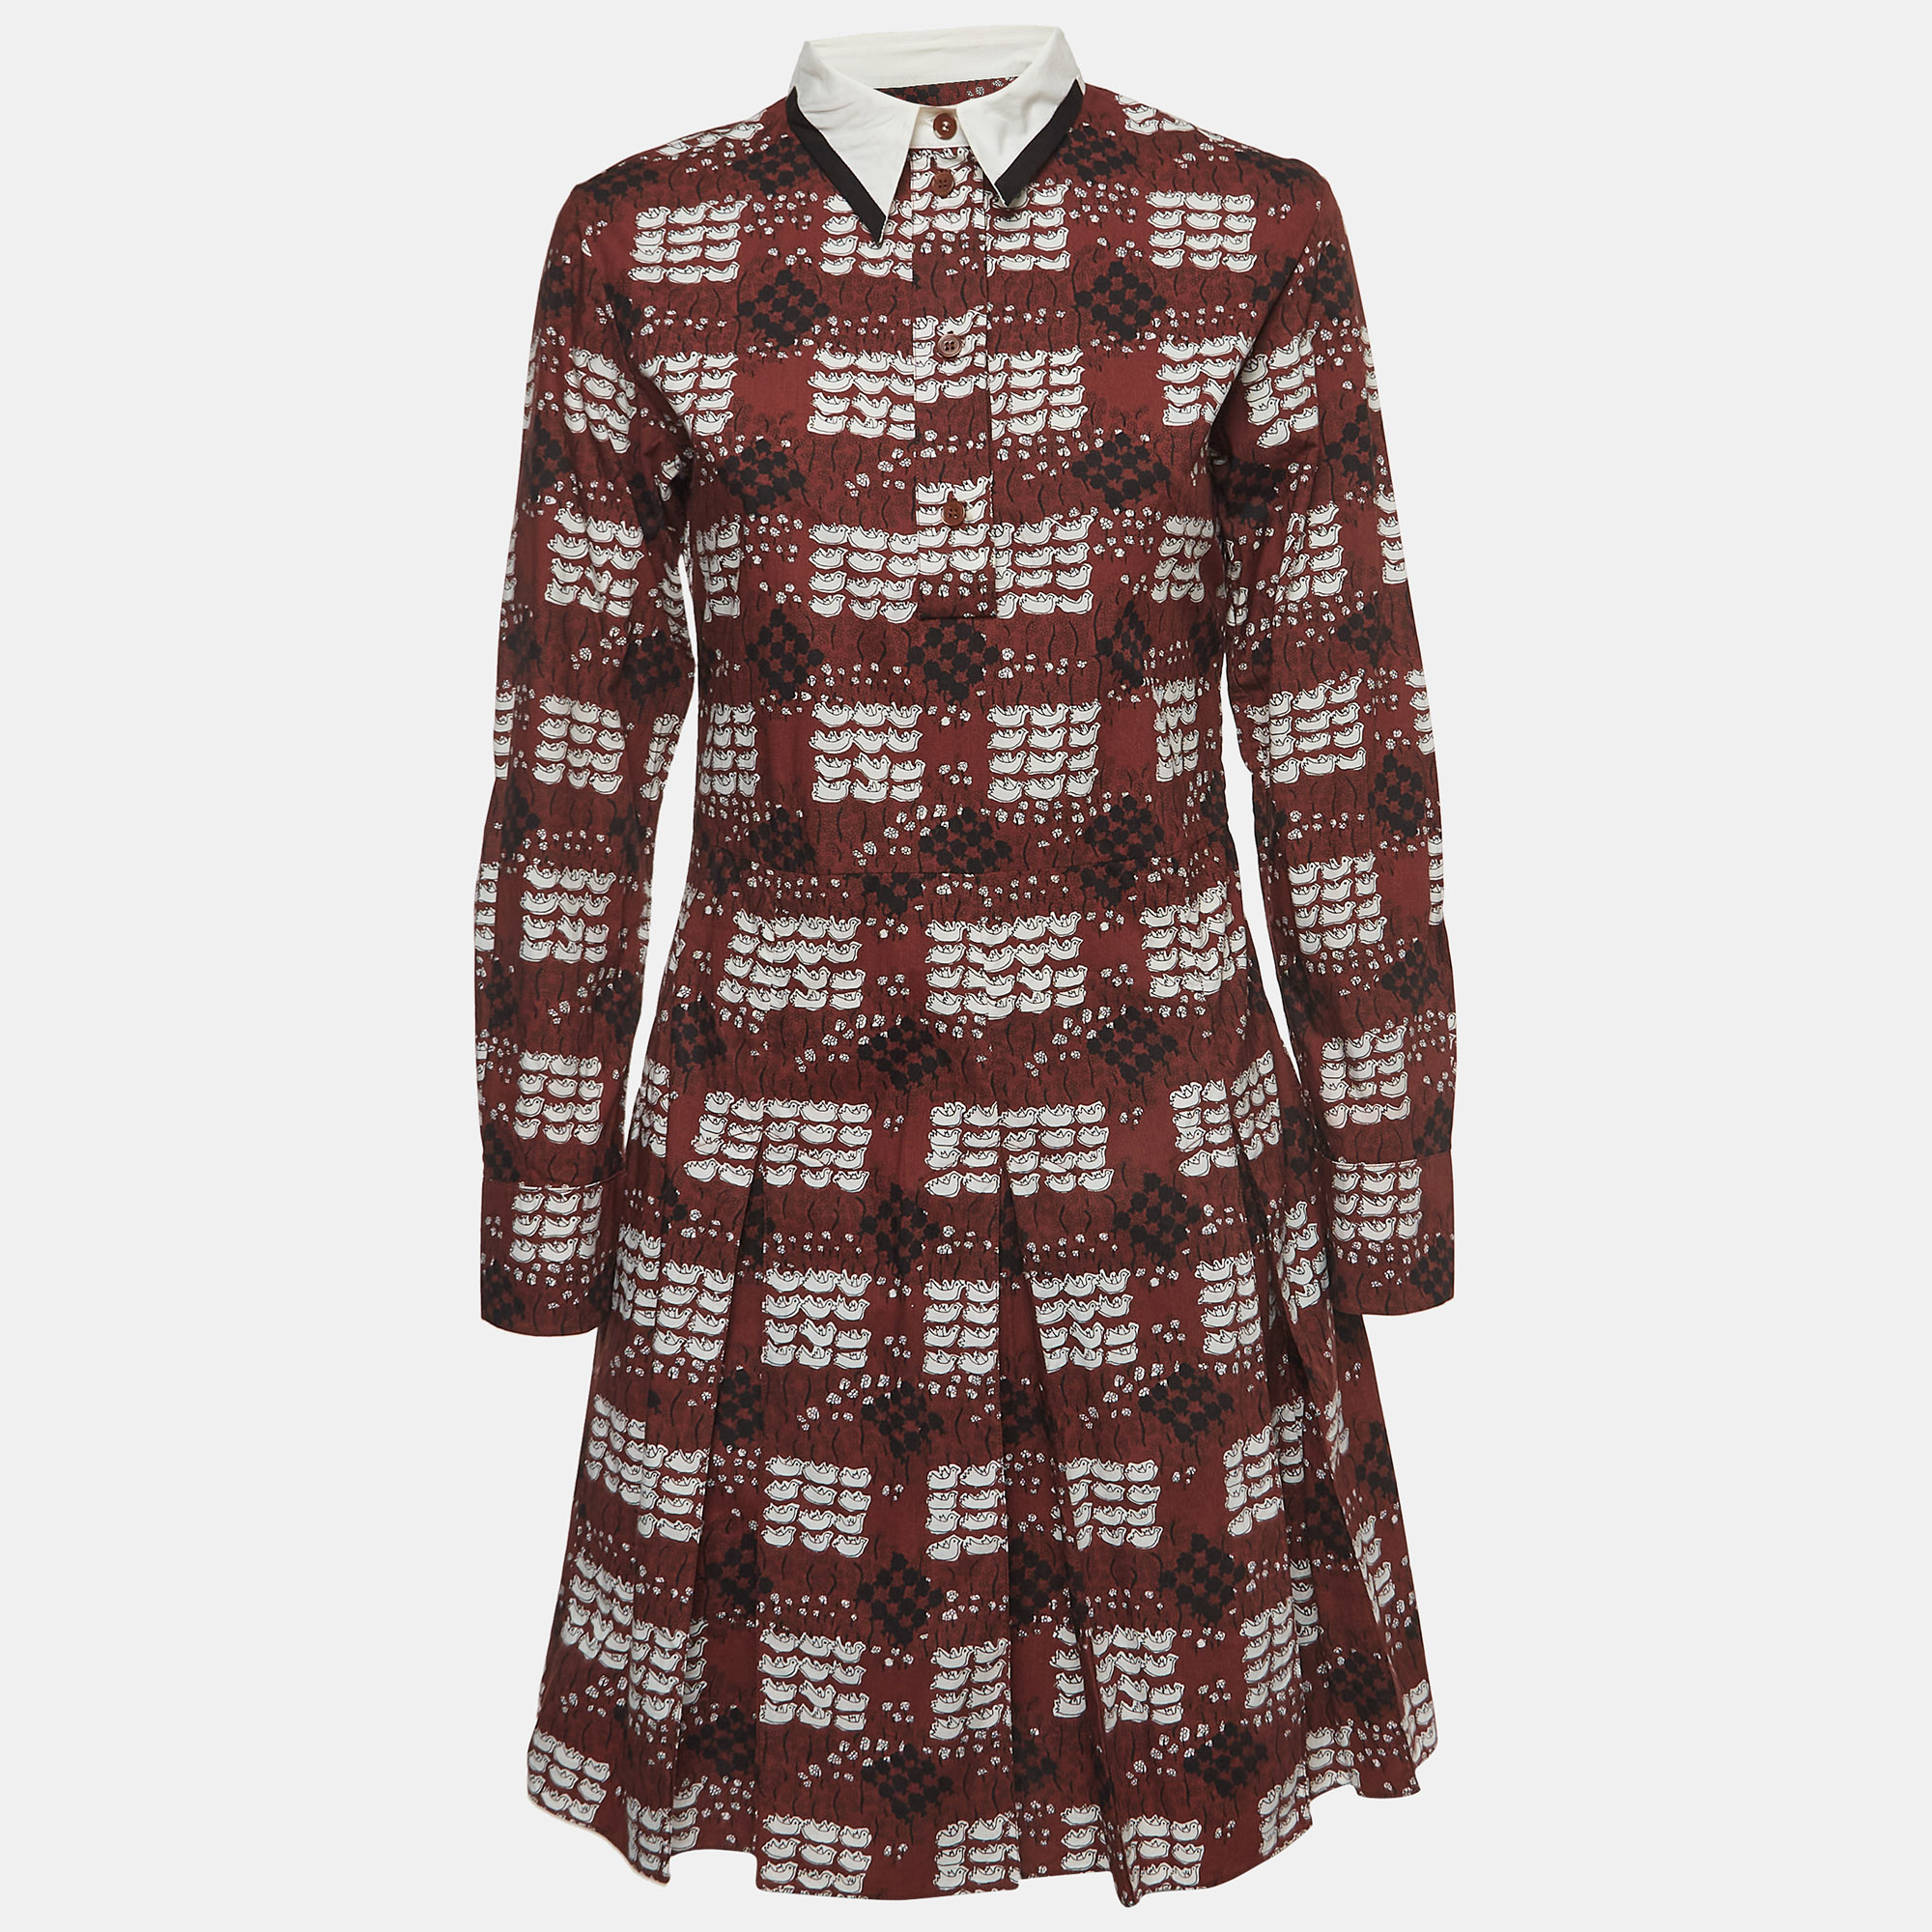 Marni Summer Edition 2013 Brown Print Cotton Pleated Button Front Shirt Dress S